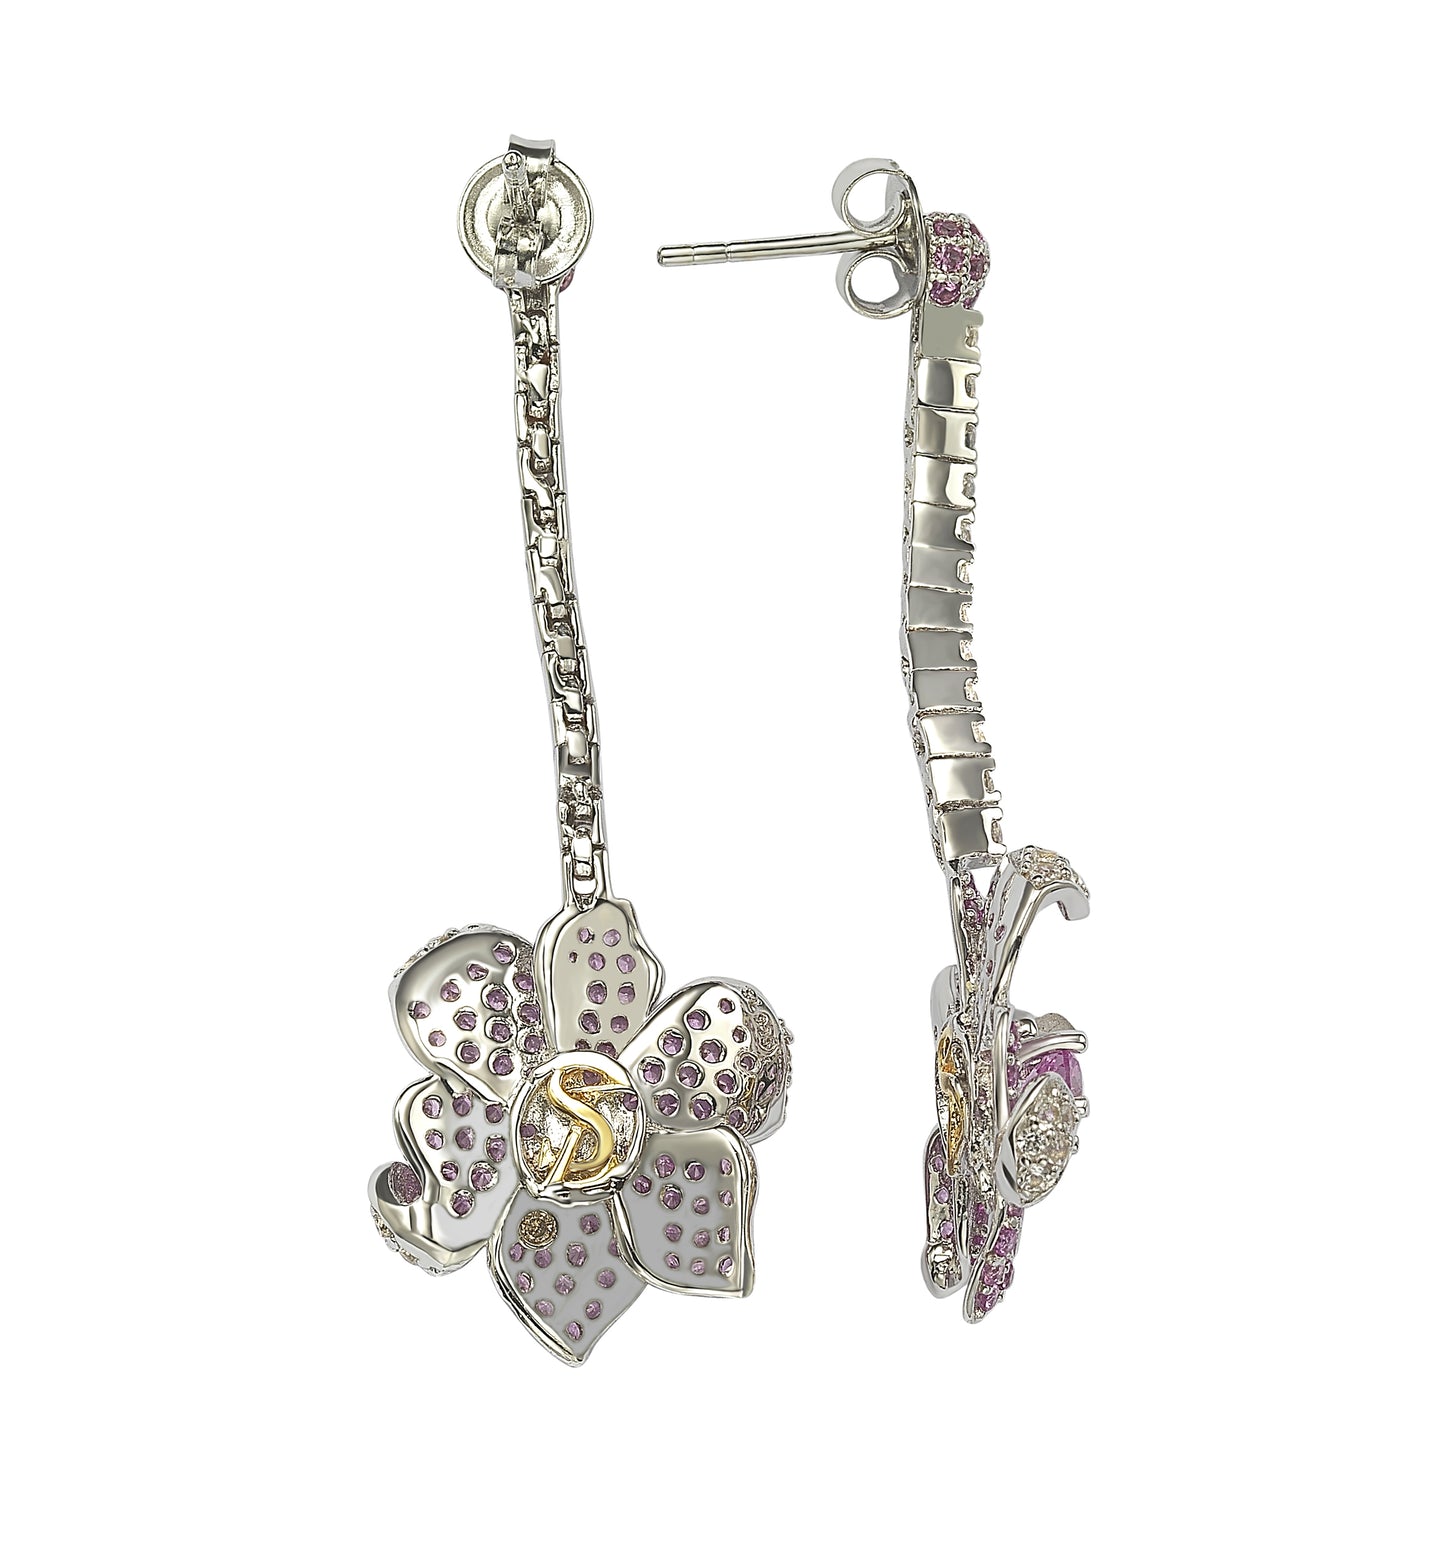 Suzy Levian Sterling Silver Pink Sapphire and Diamond Accent Flower Earrings